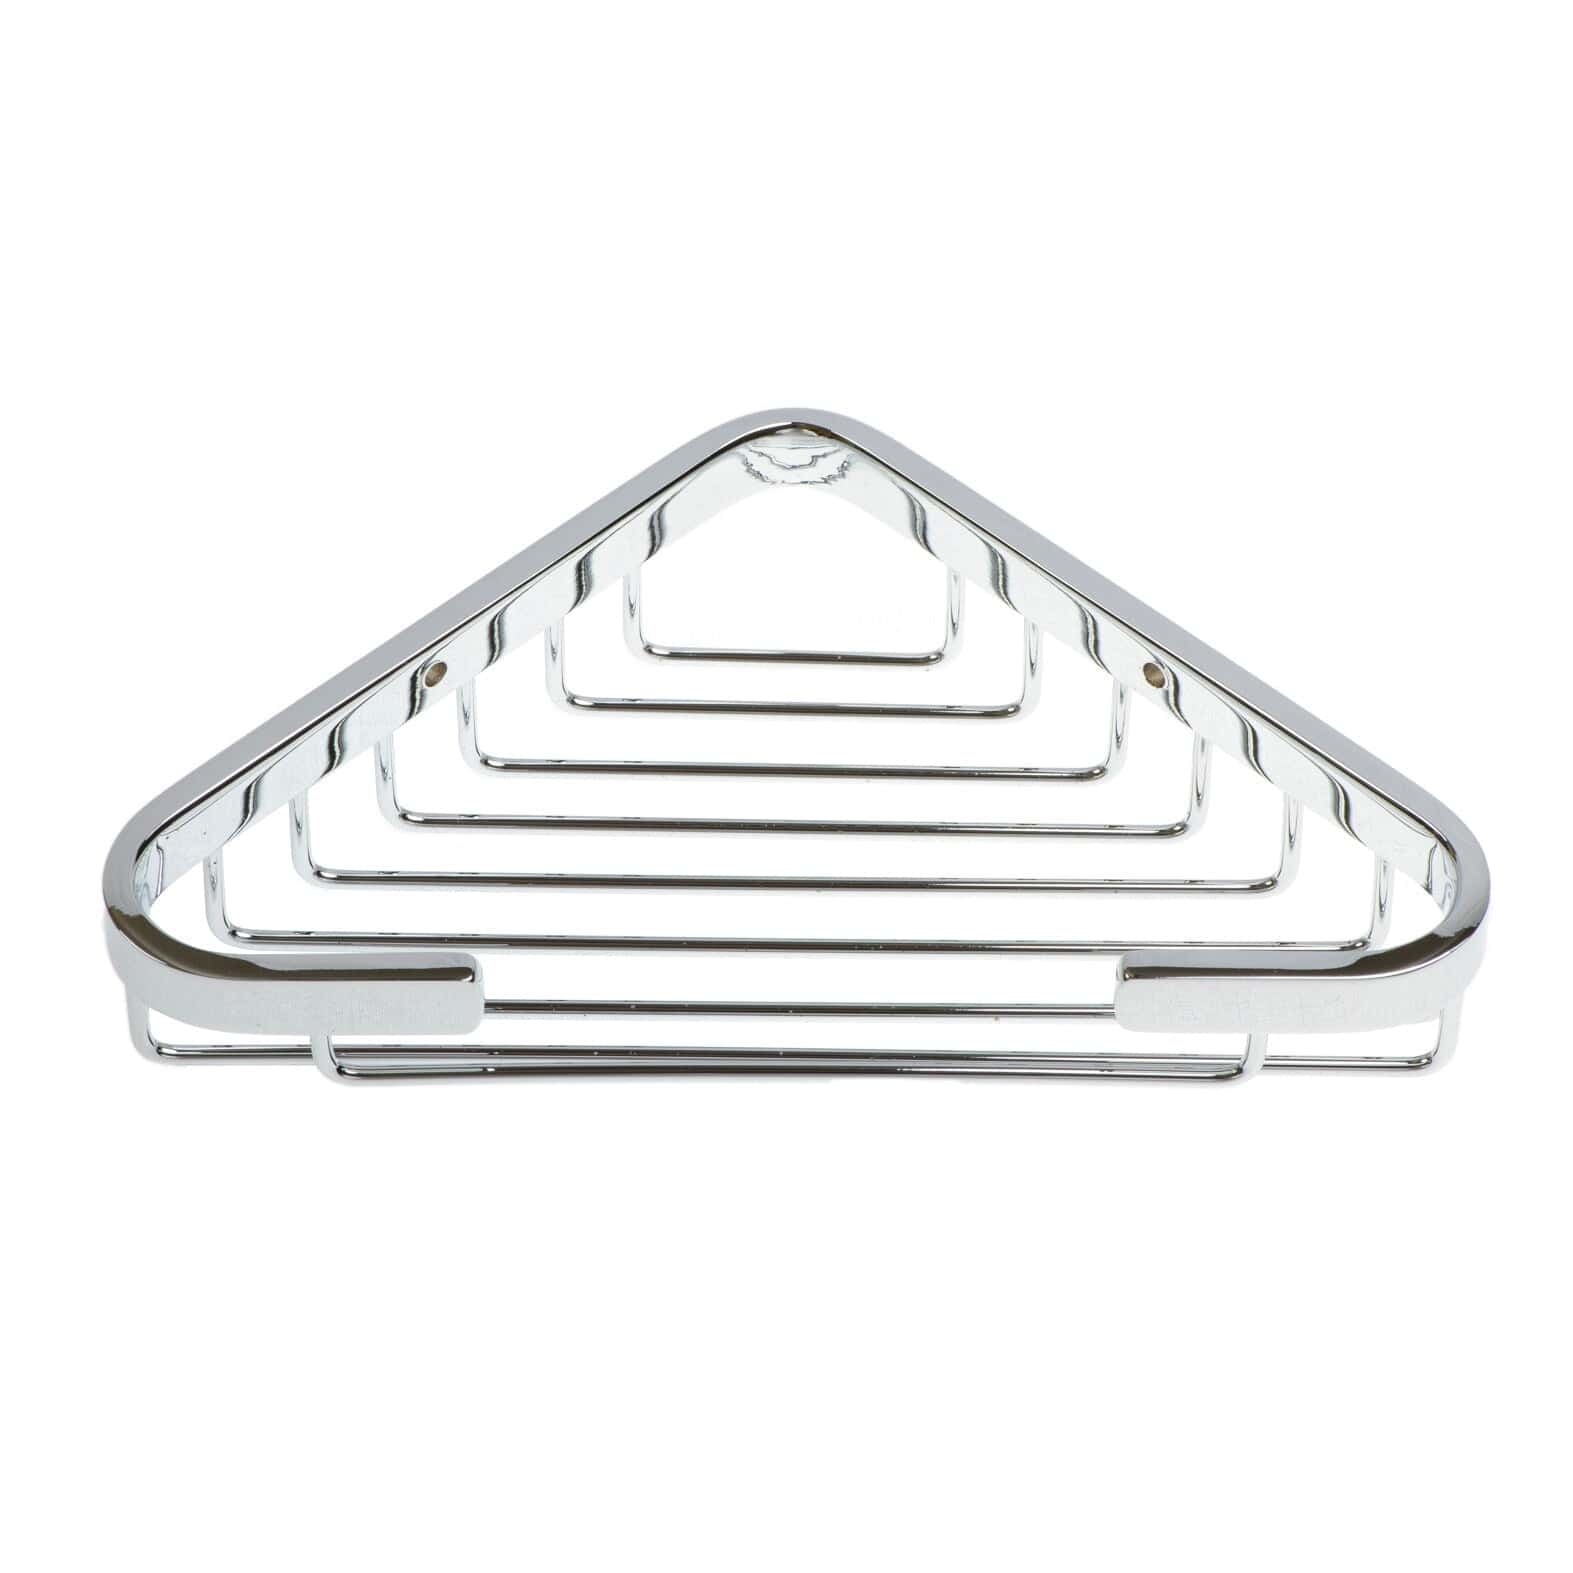 Mediclinics Chrome Plated Brass Triangular Soap Dish - AC0964C | Supply Master | Accra, Ghana Bathroom Accessories Buy Tools hardware Building materials